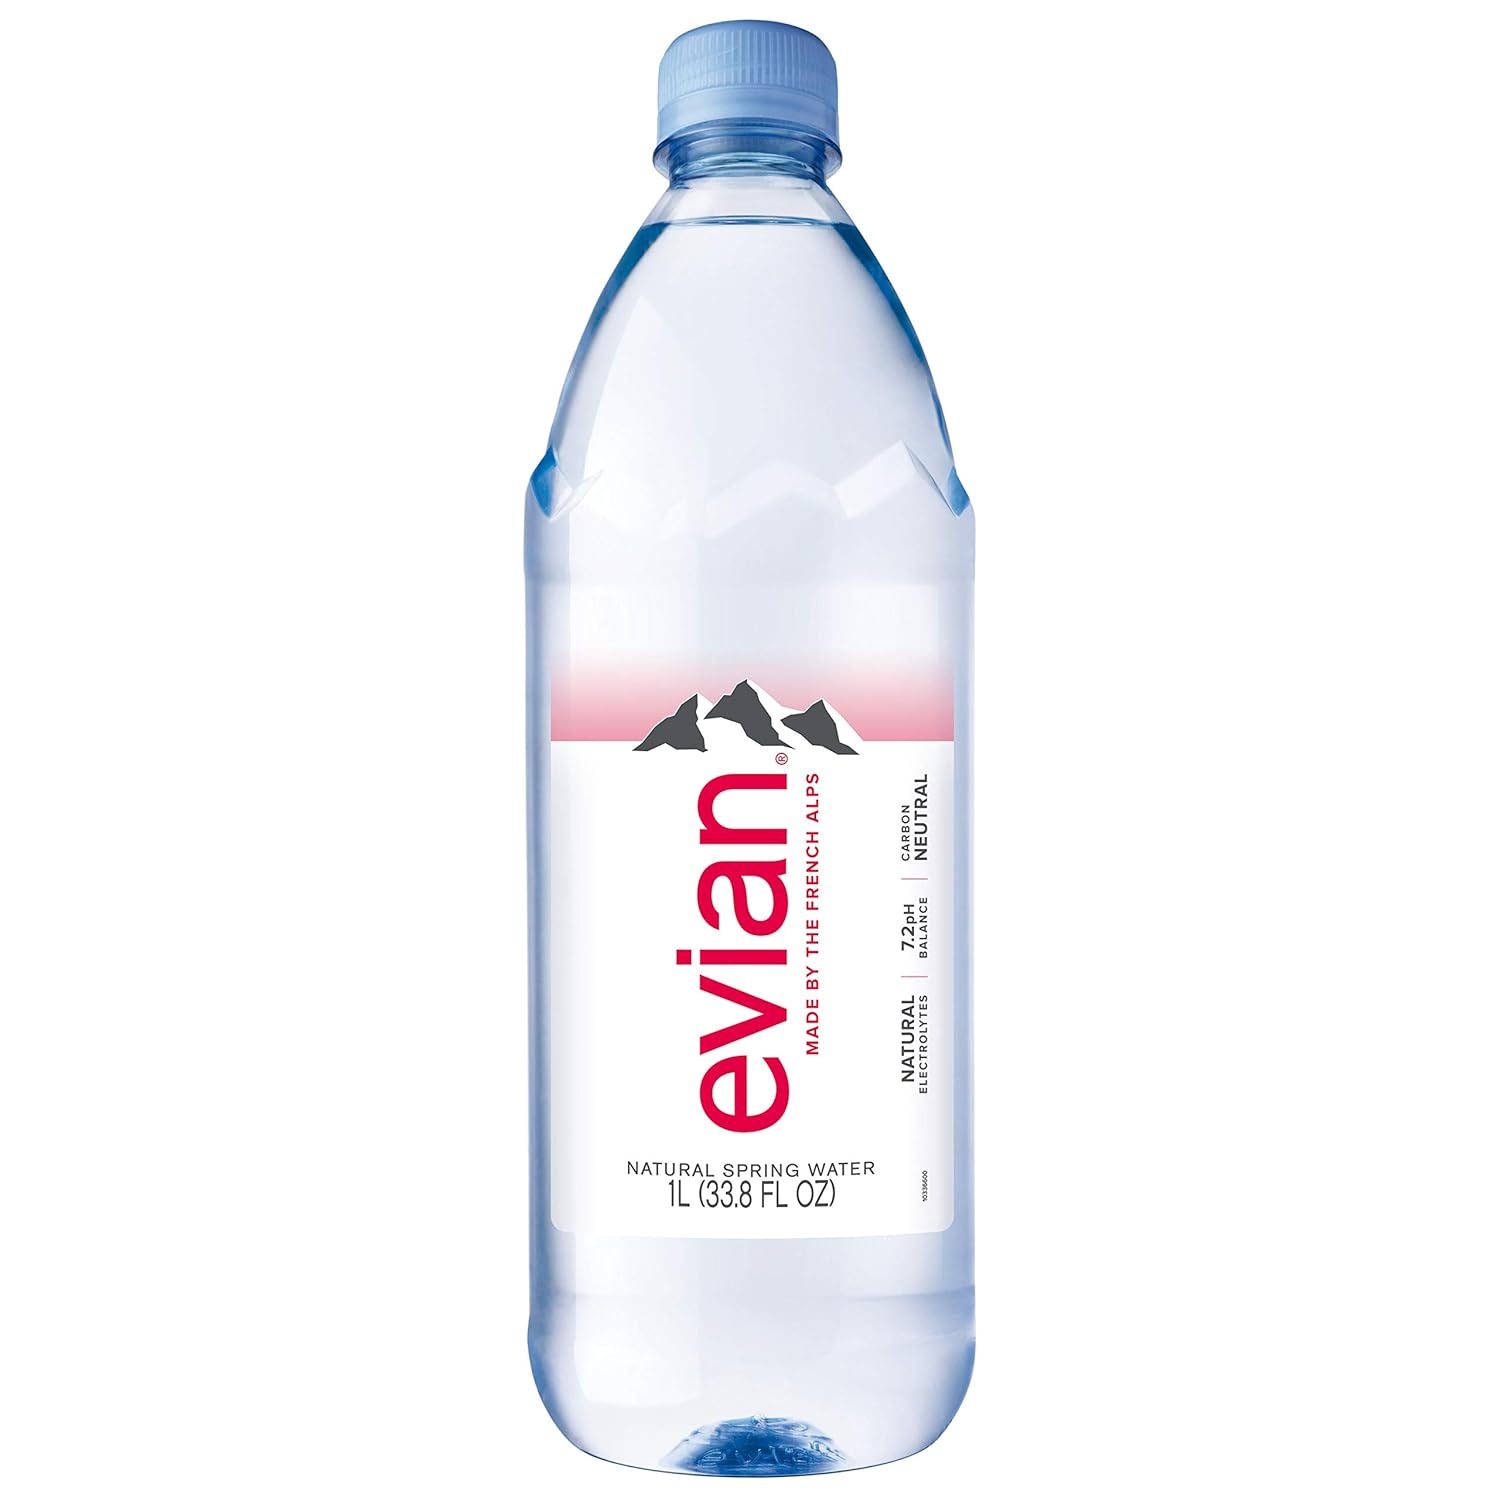 evian Natural Spring Water, Naturally Filtered Spring Water in Large Bottles, 33.81 Fl Oz (Pack of 12)